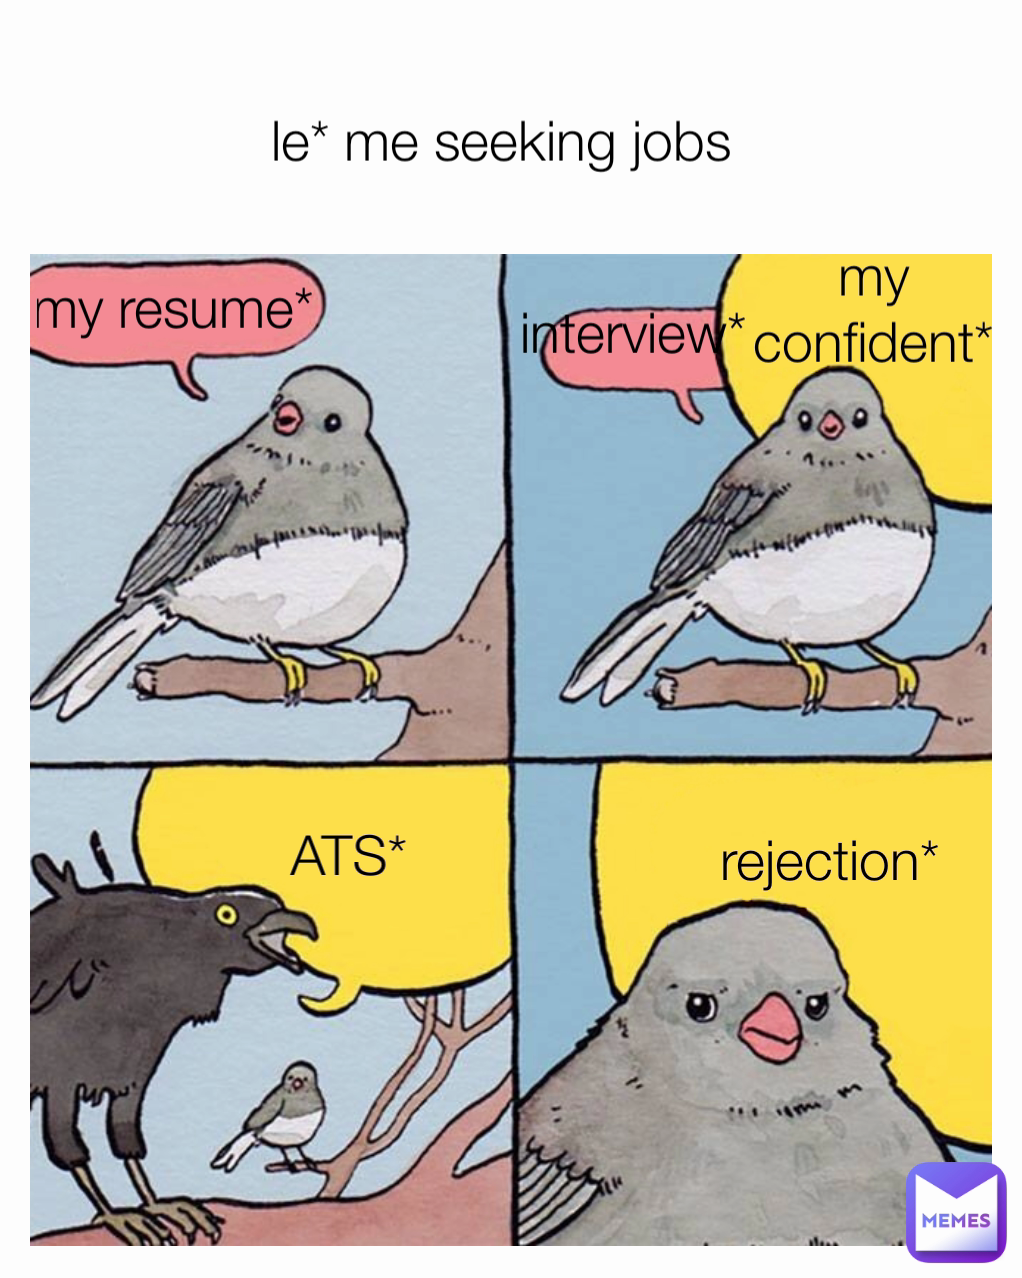 le* me seeking jobs  my confident* my resume*  rejection* interview* ATS*